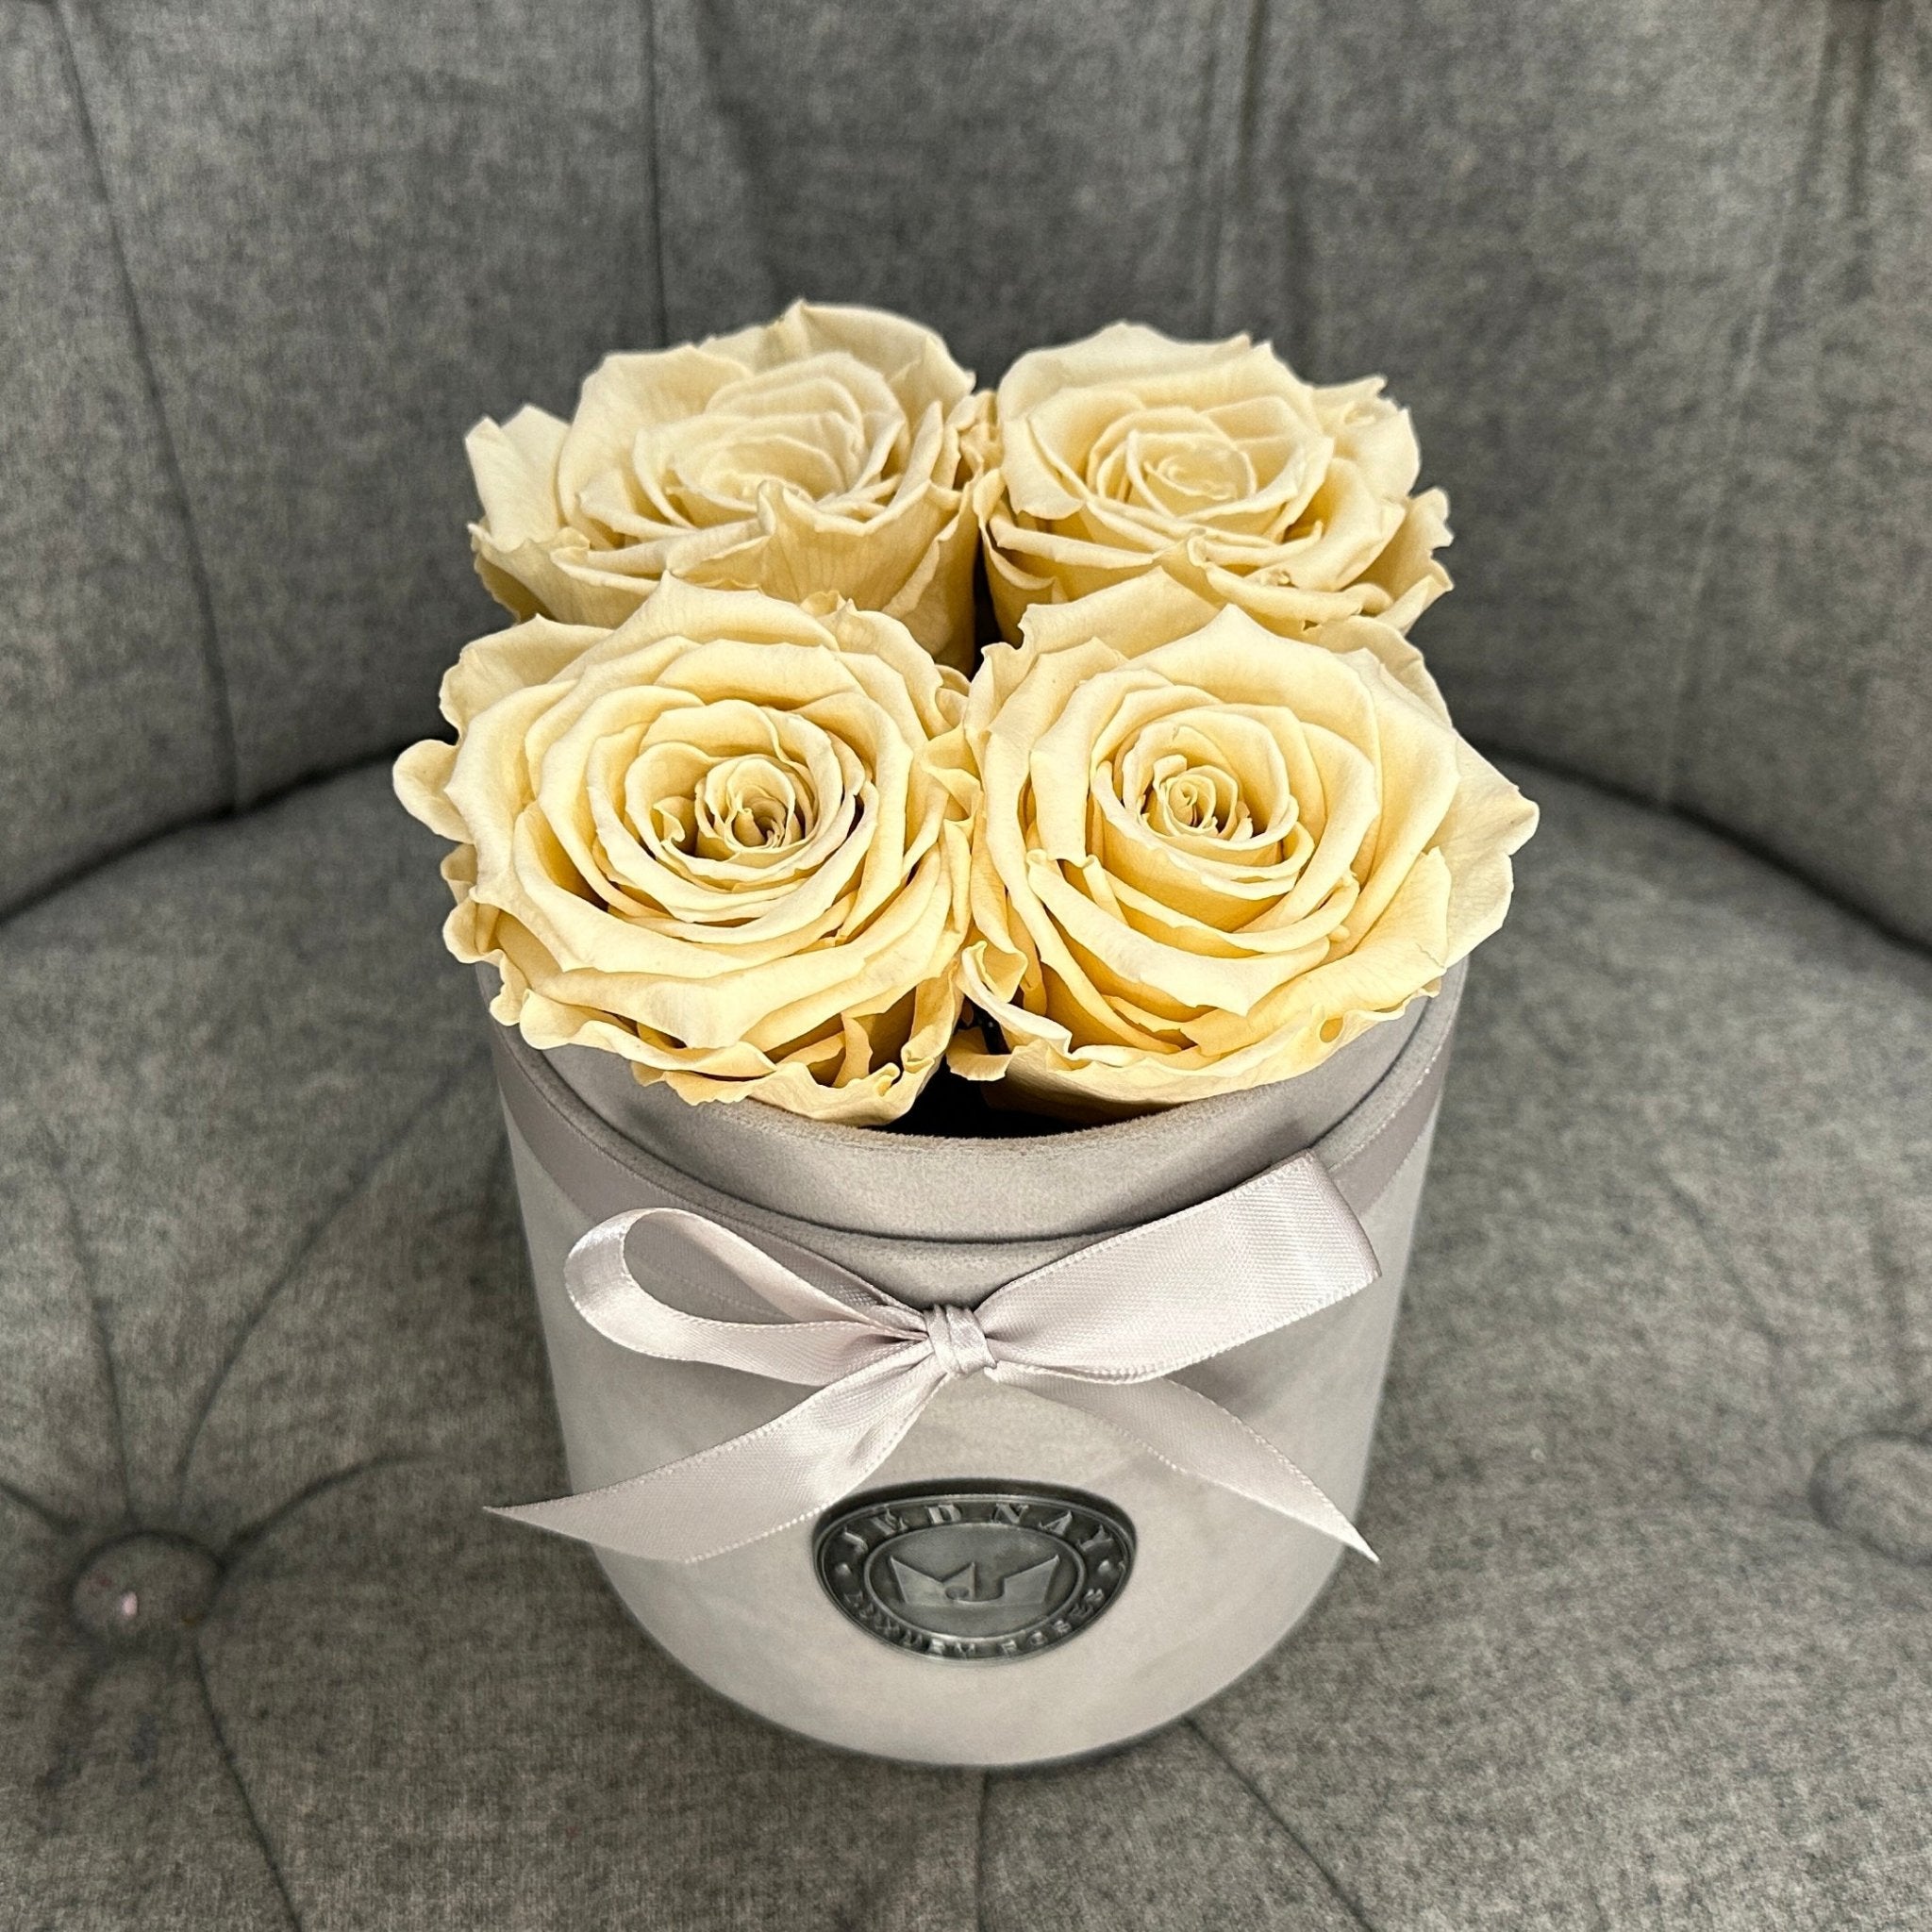 Petite Grey Suede Forever Rose Box - Champagne Eternal Roses - Jednay Roses